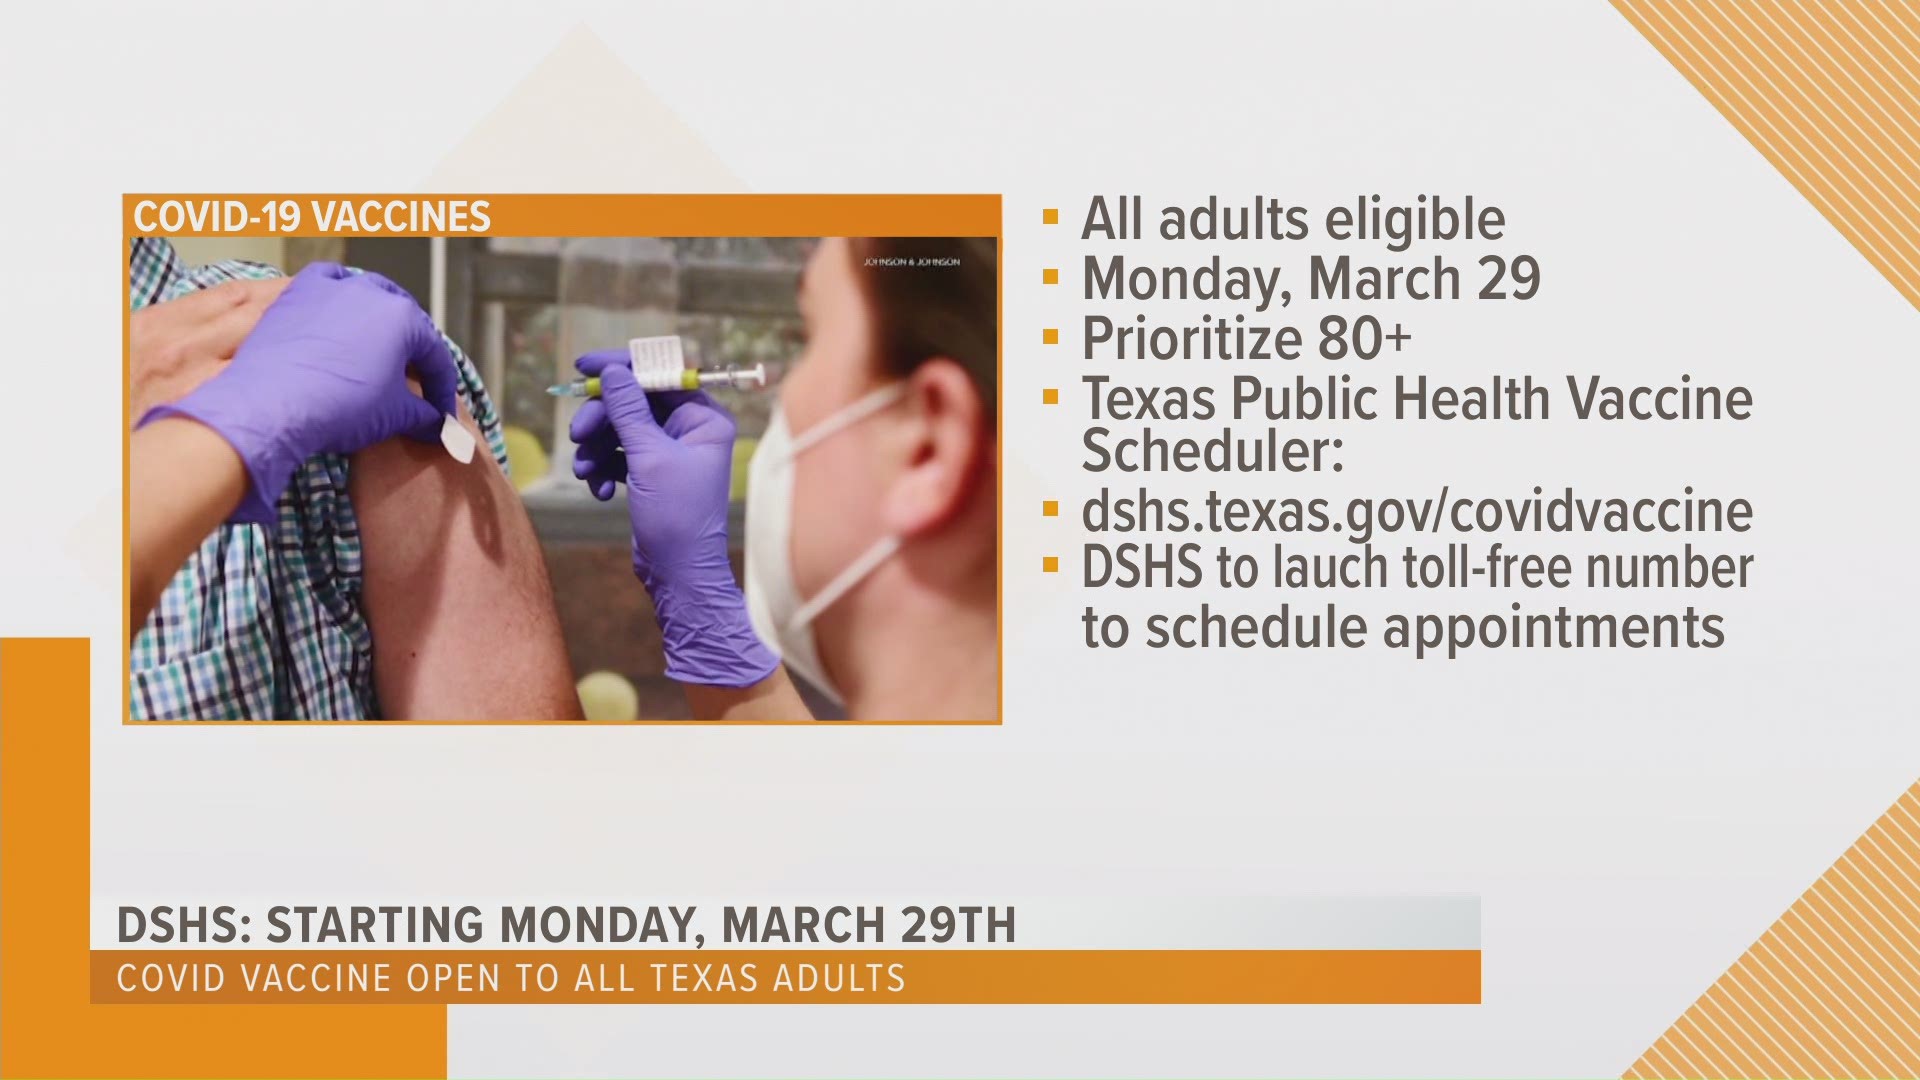 The Texas Department of State Health Services made the announcement on Tuesday.